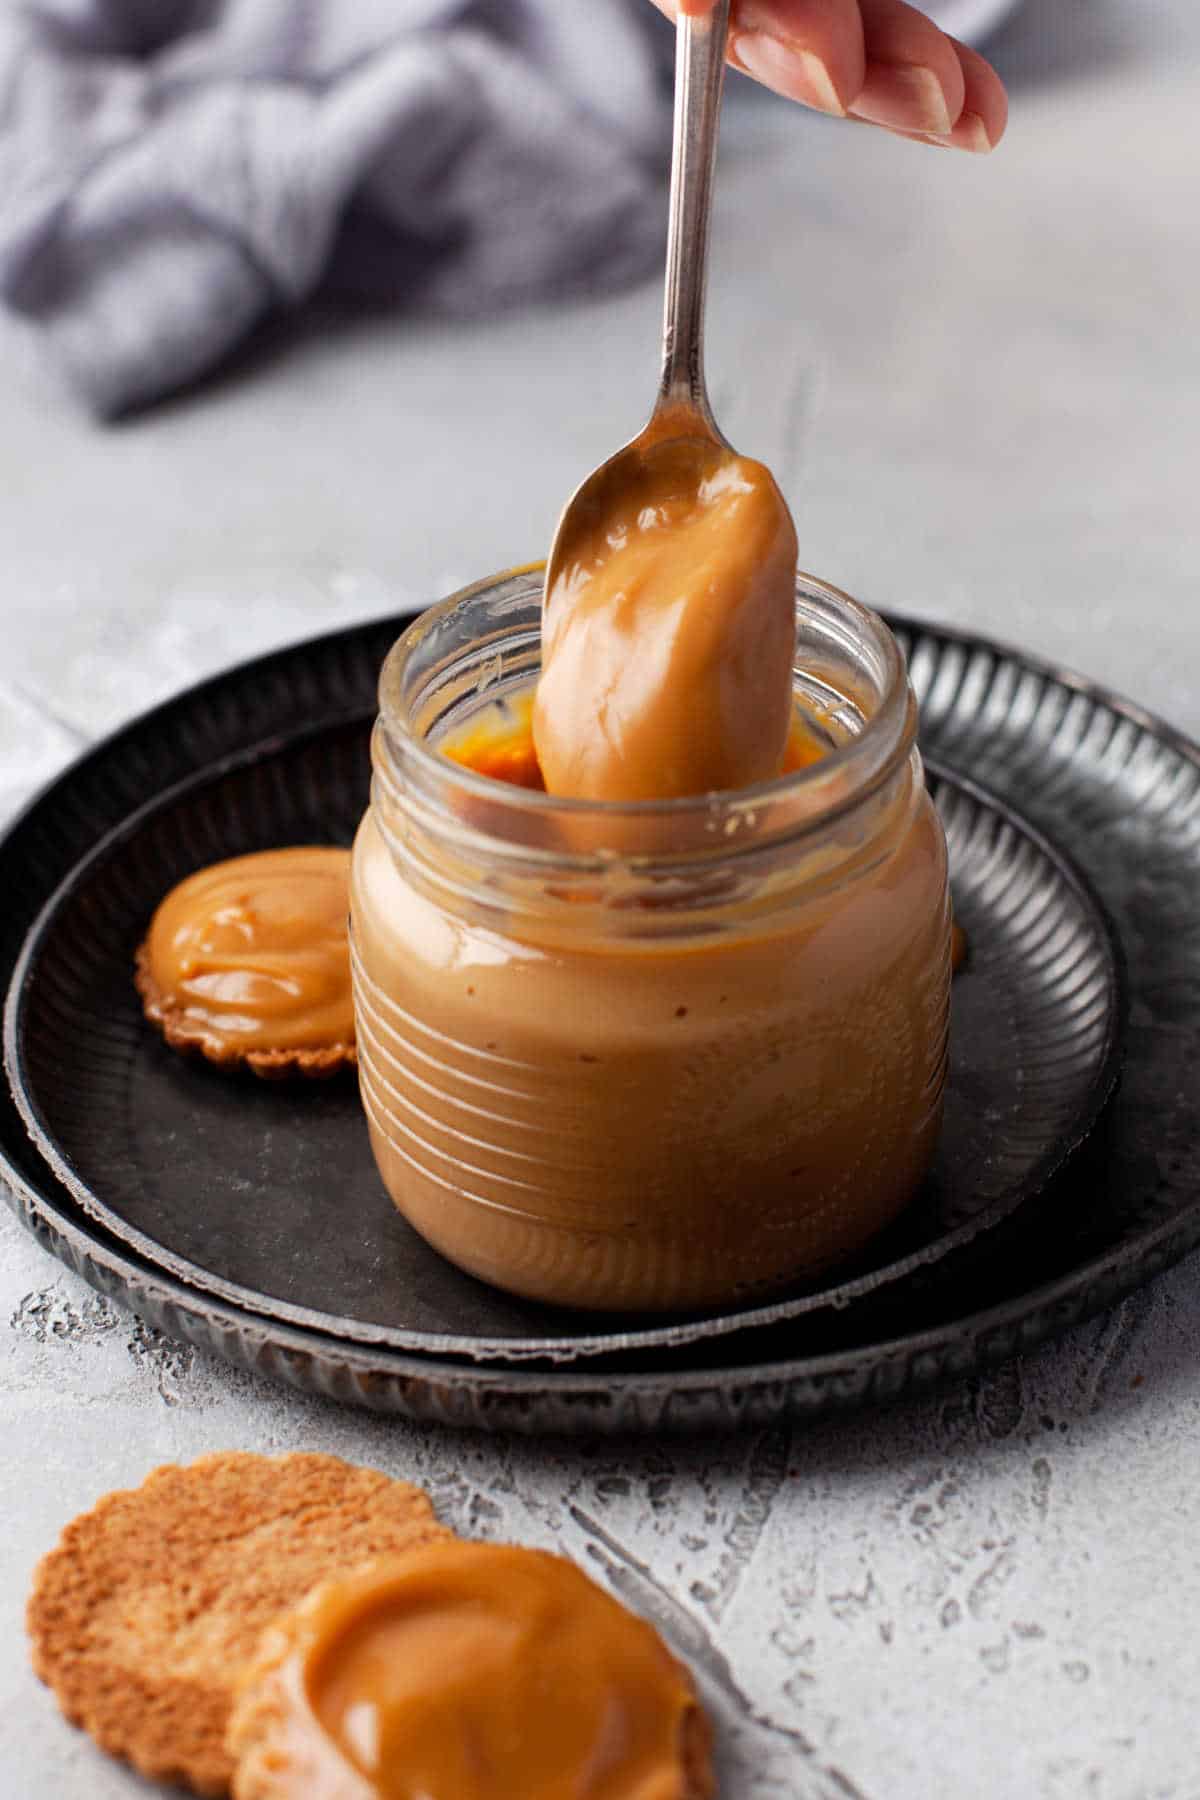 A spoon coming out of a jar of dulce de leche.